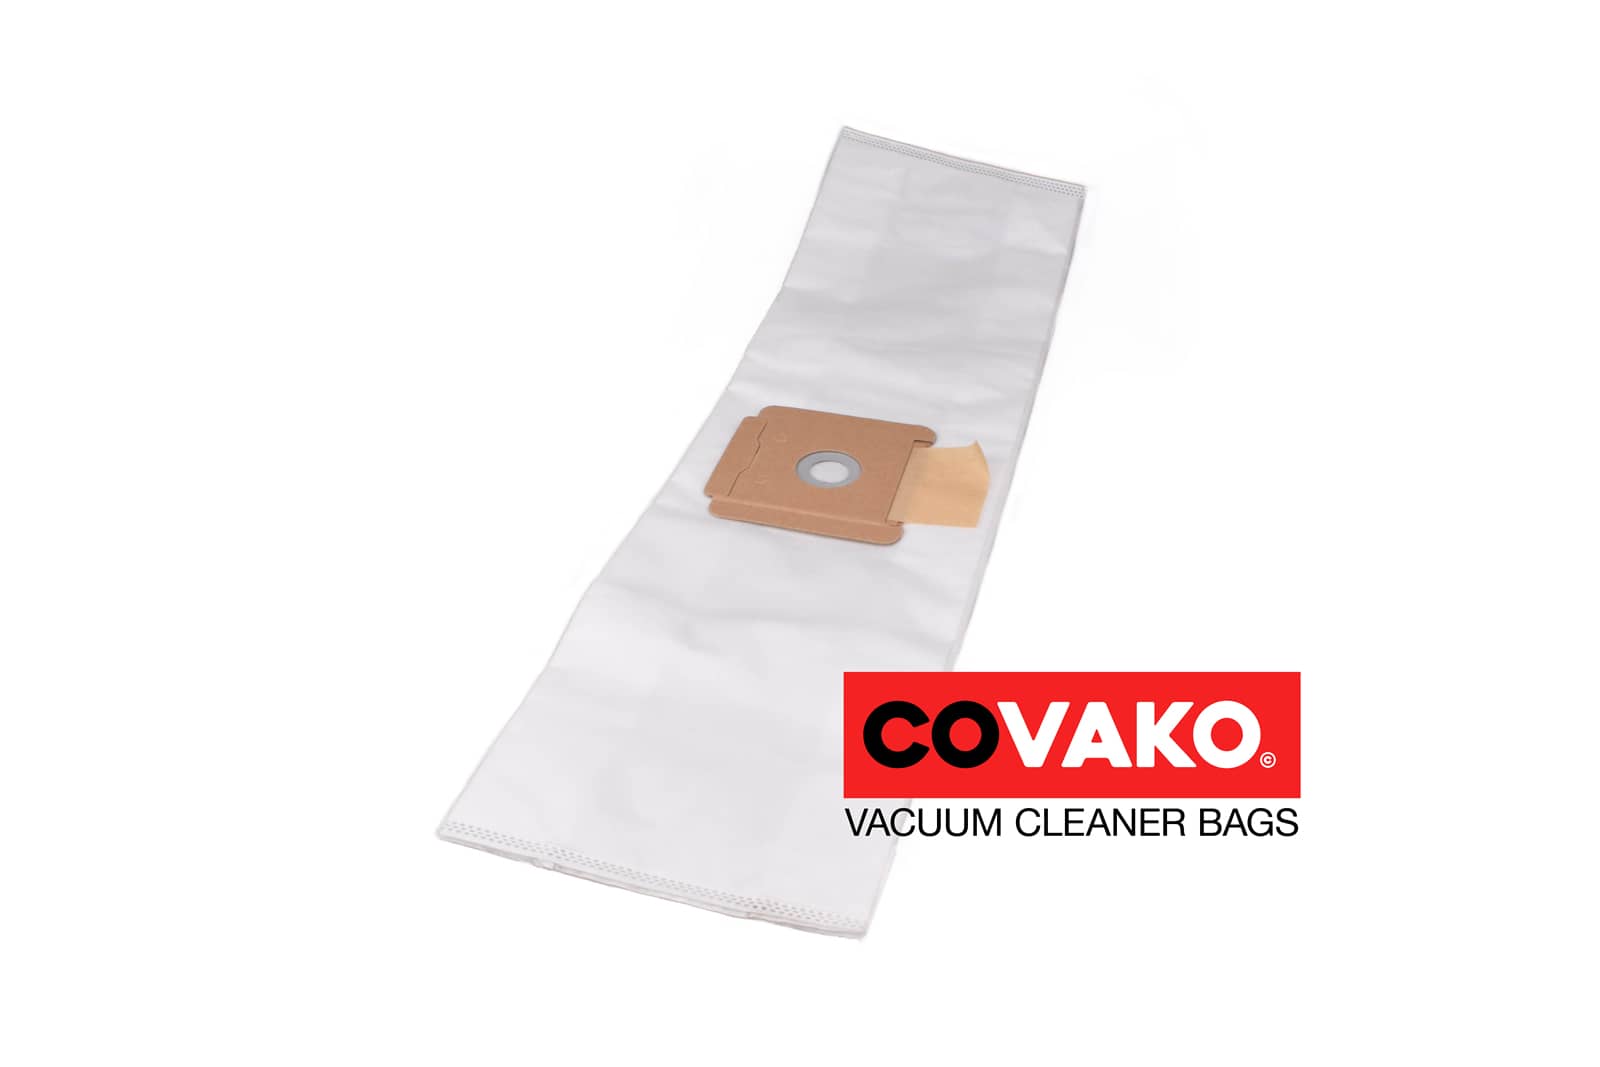 Proclean T 111 Piccolino / Synthesis - Proclean vacuum cleaner bags